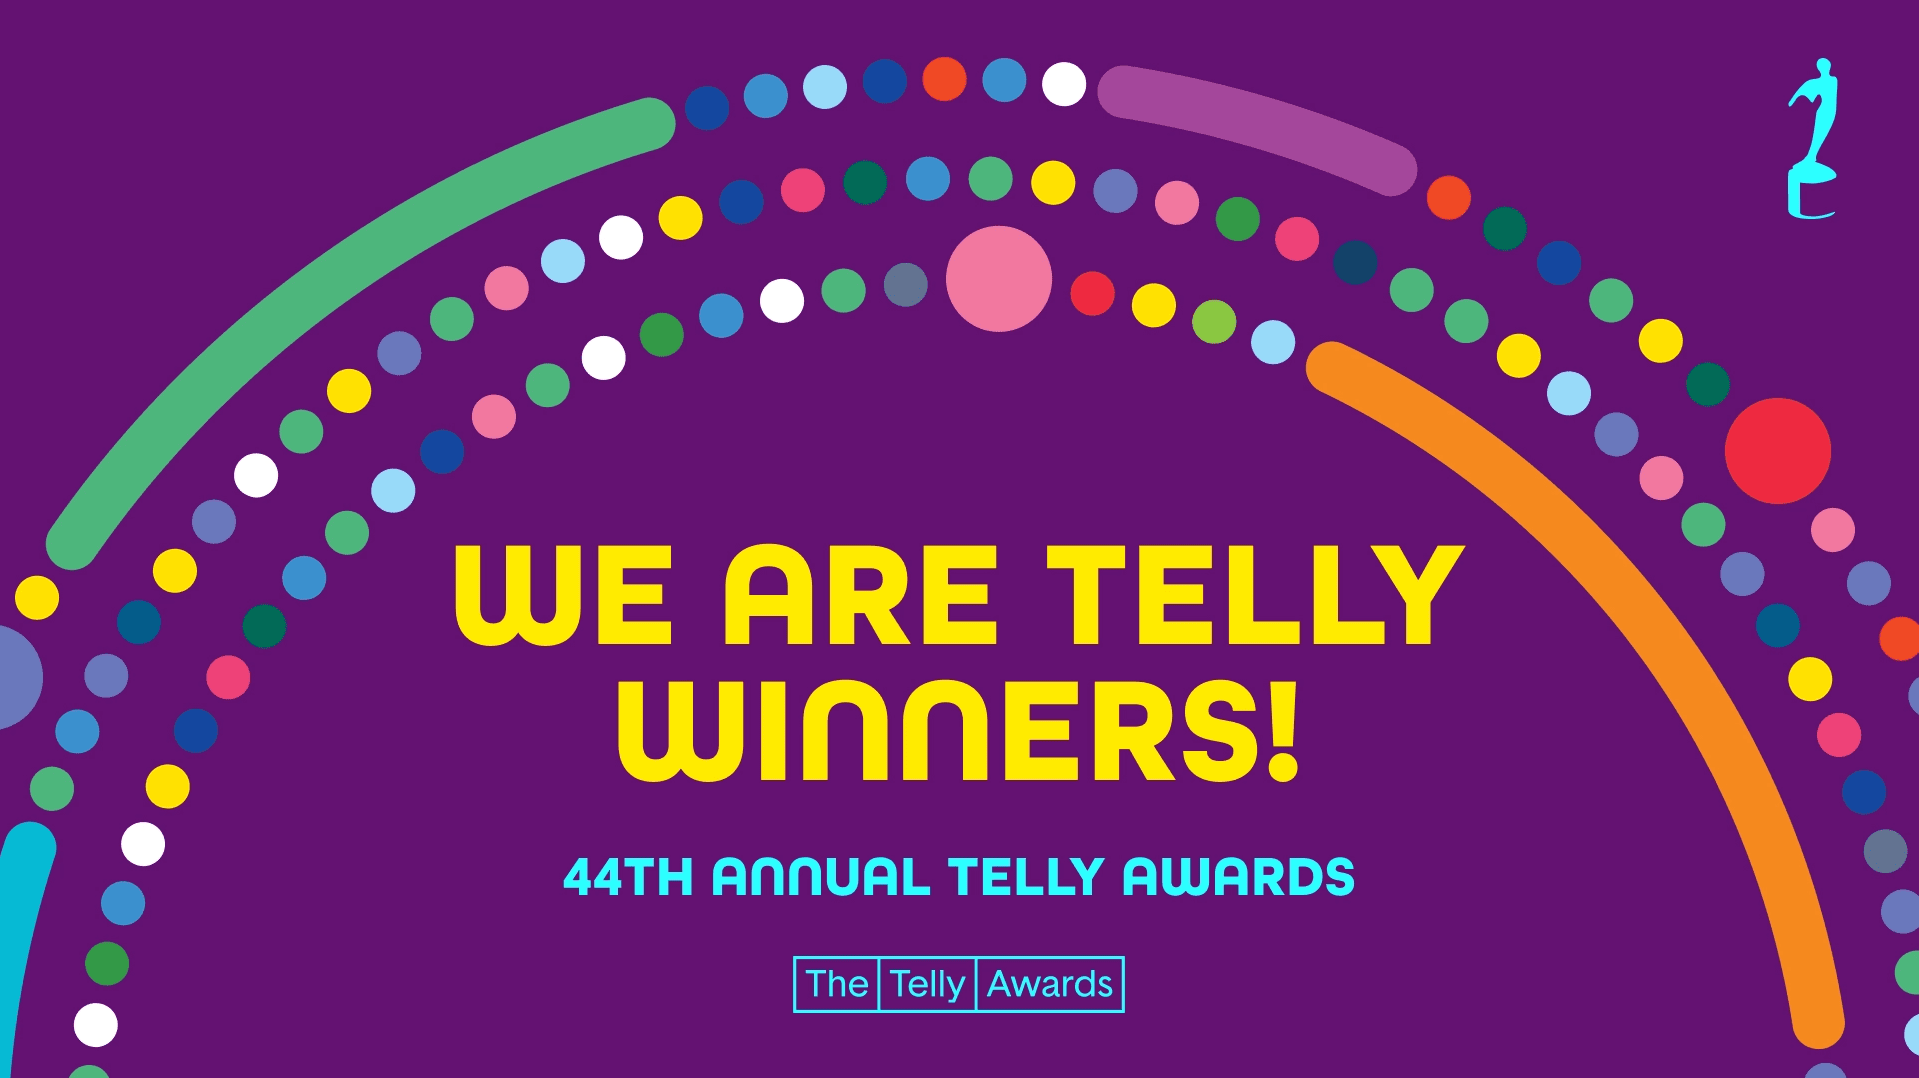 We Are Telly Winners!